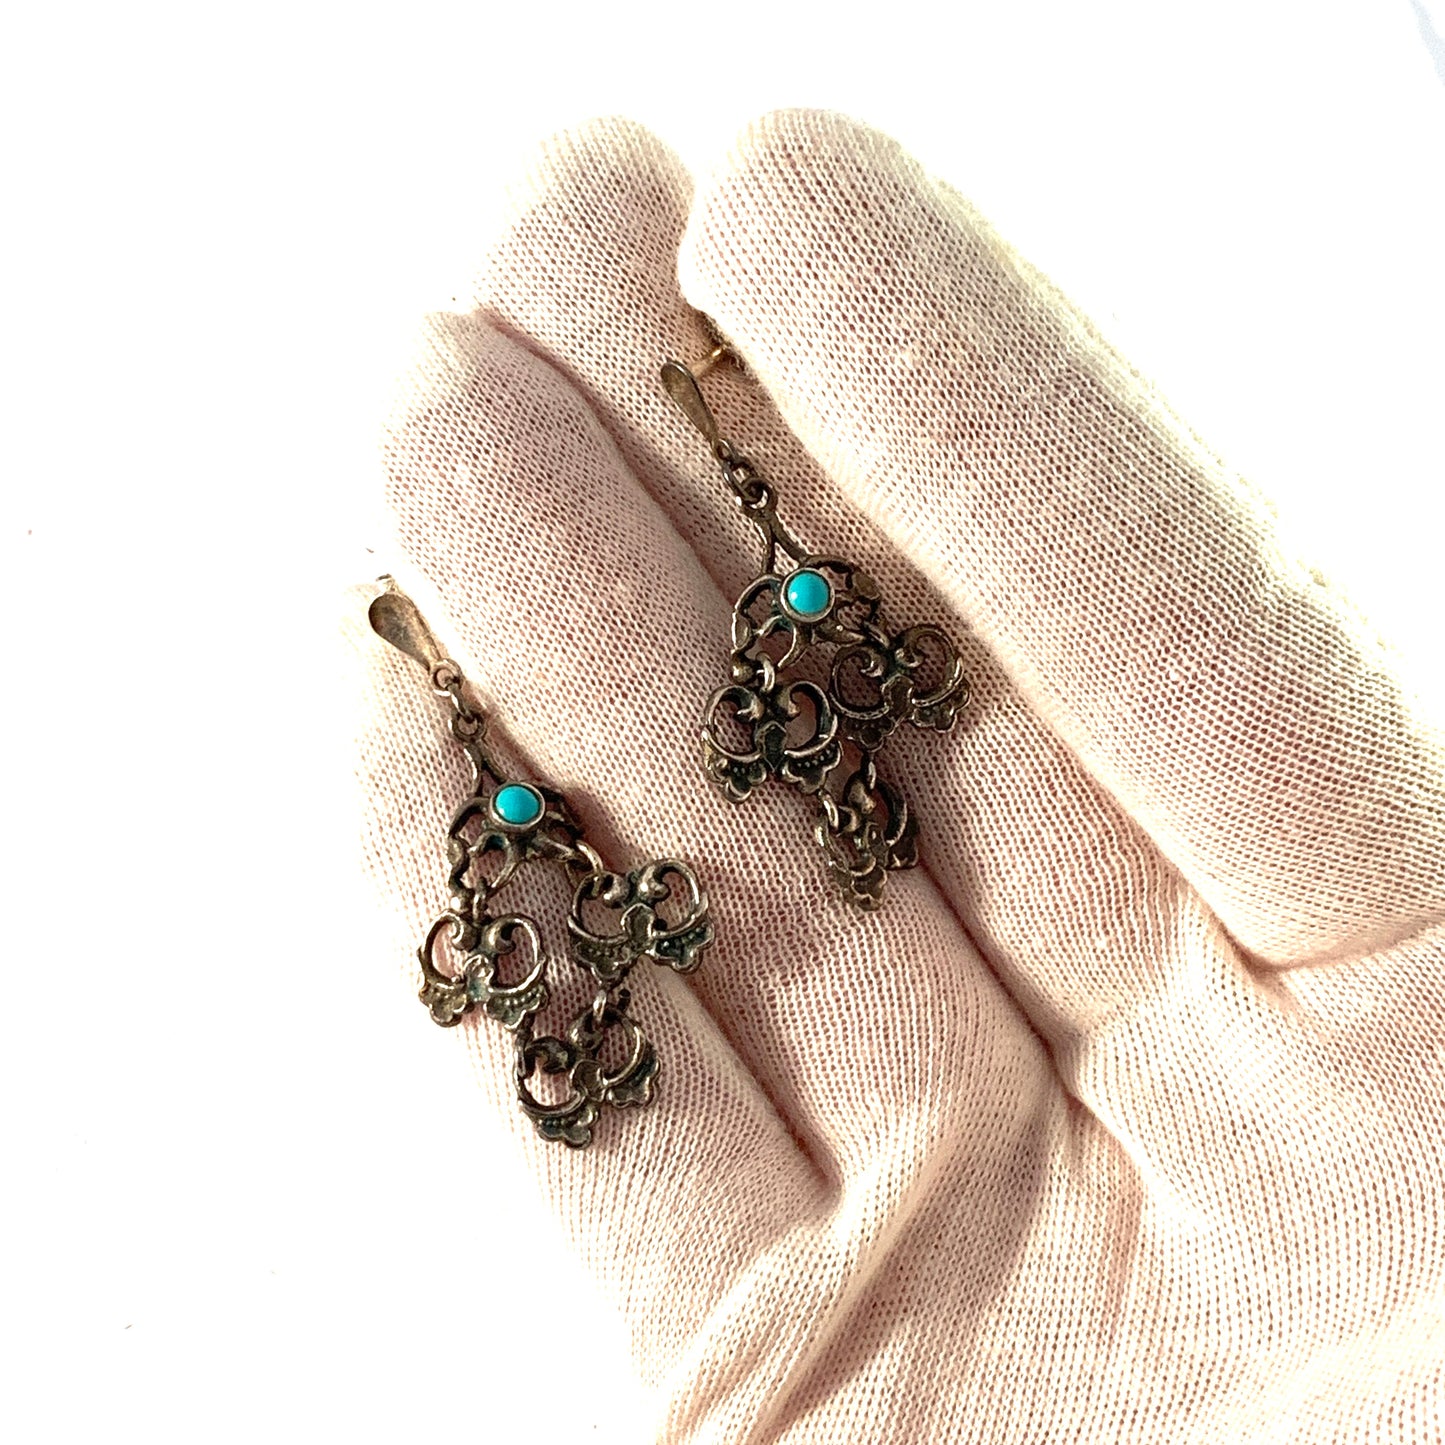 Finland, Vintage c 1950s Solid 830 Silver Turquoise Earrings.